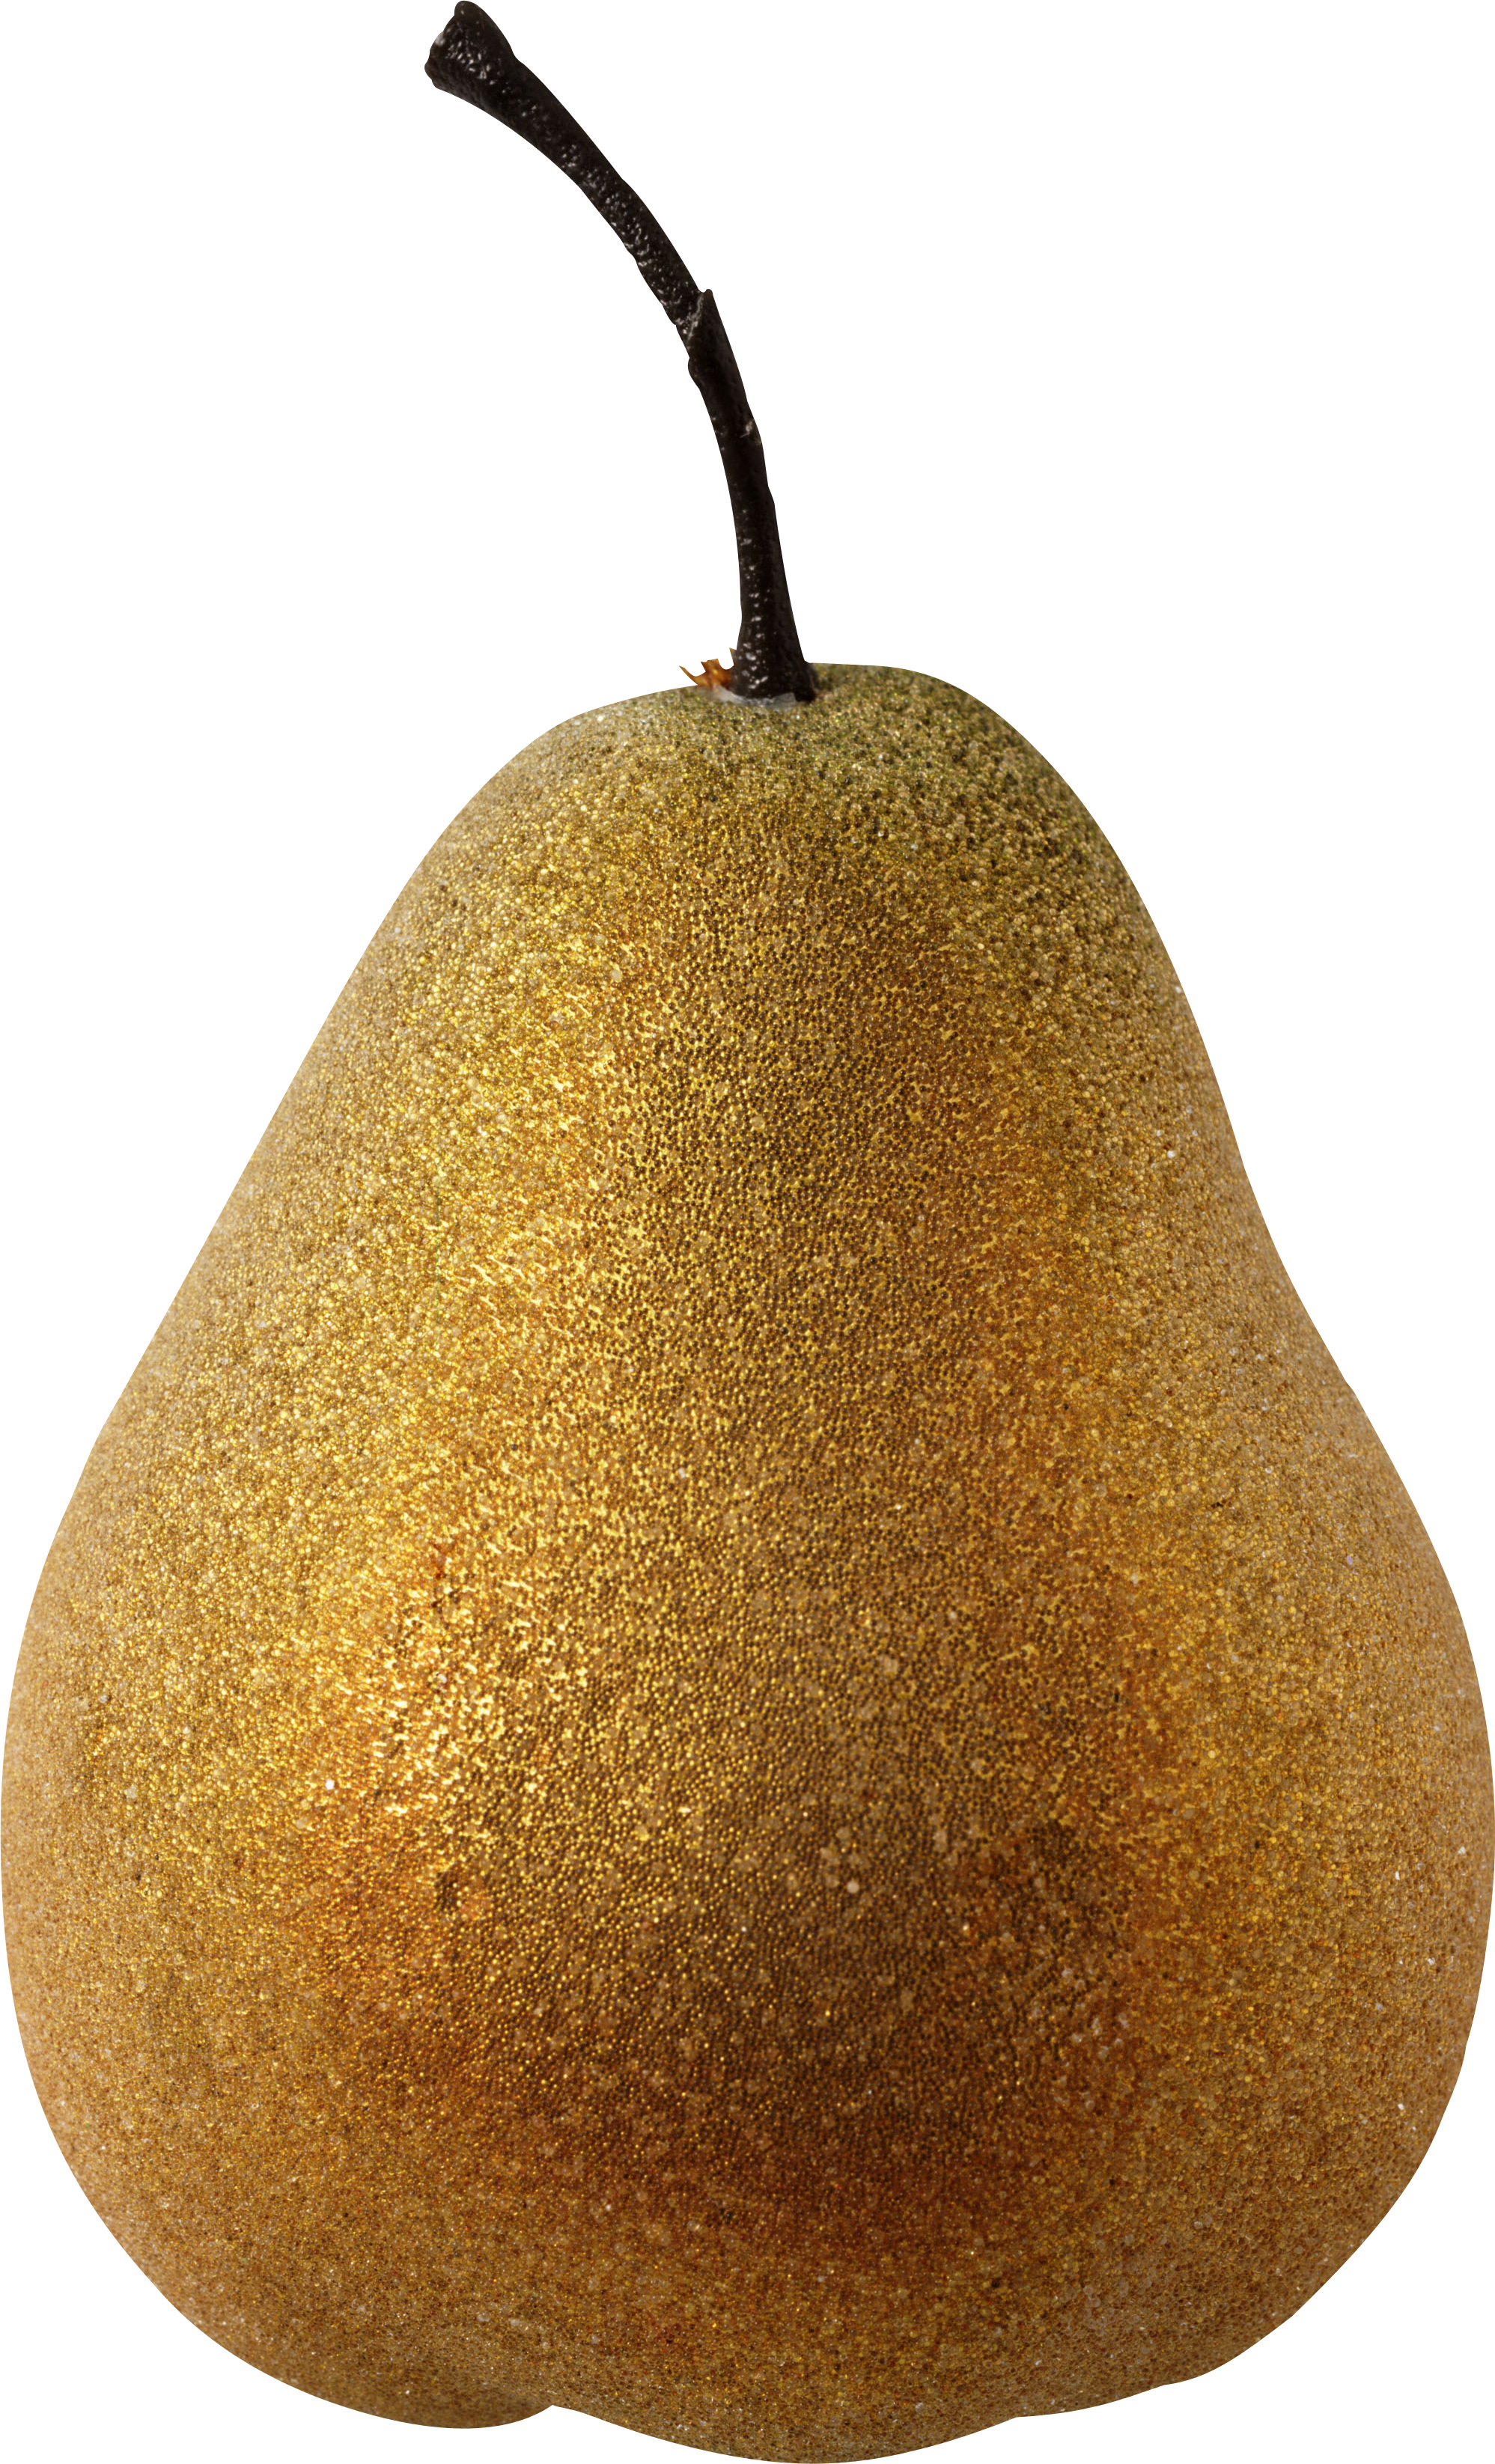 Ripe Pear Png Image - Pear, Transparent background PNG HD thumbnail